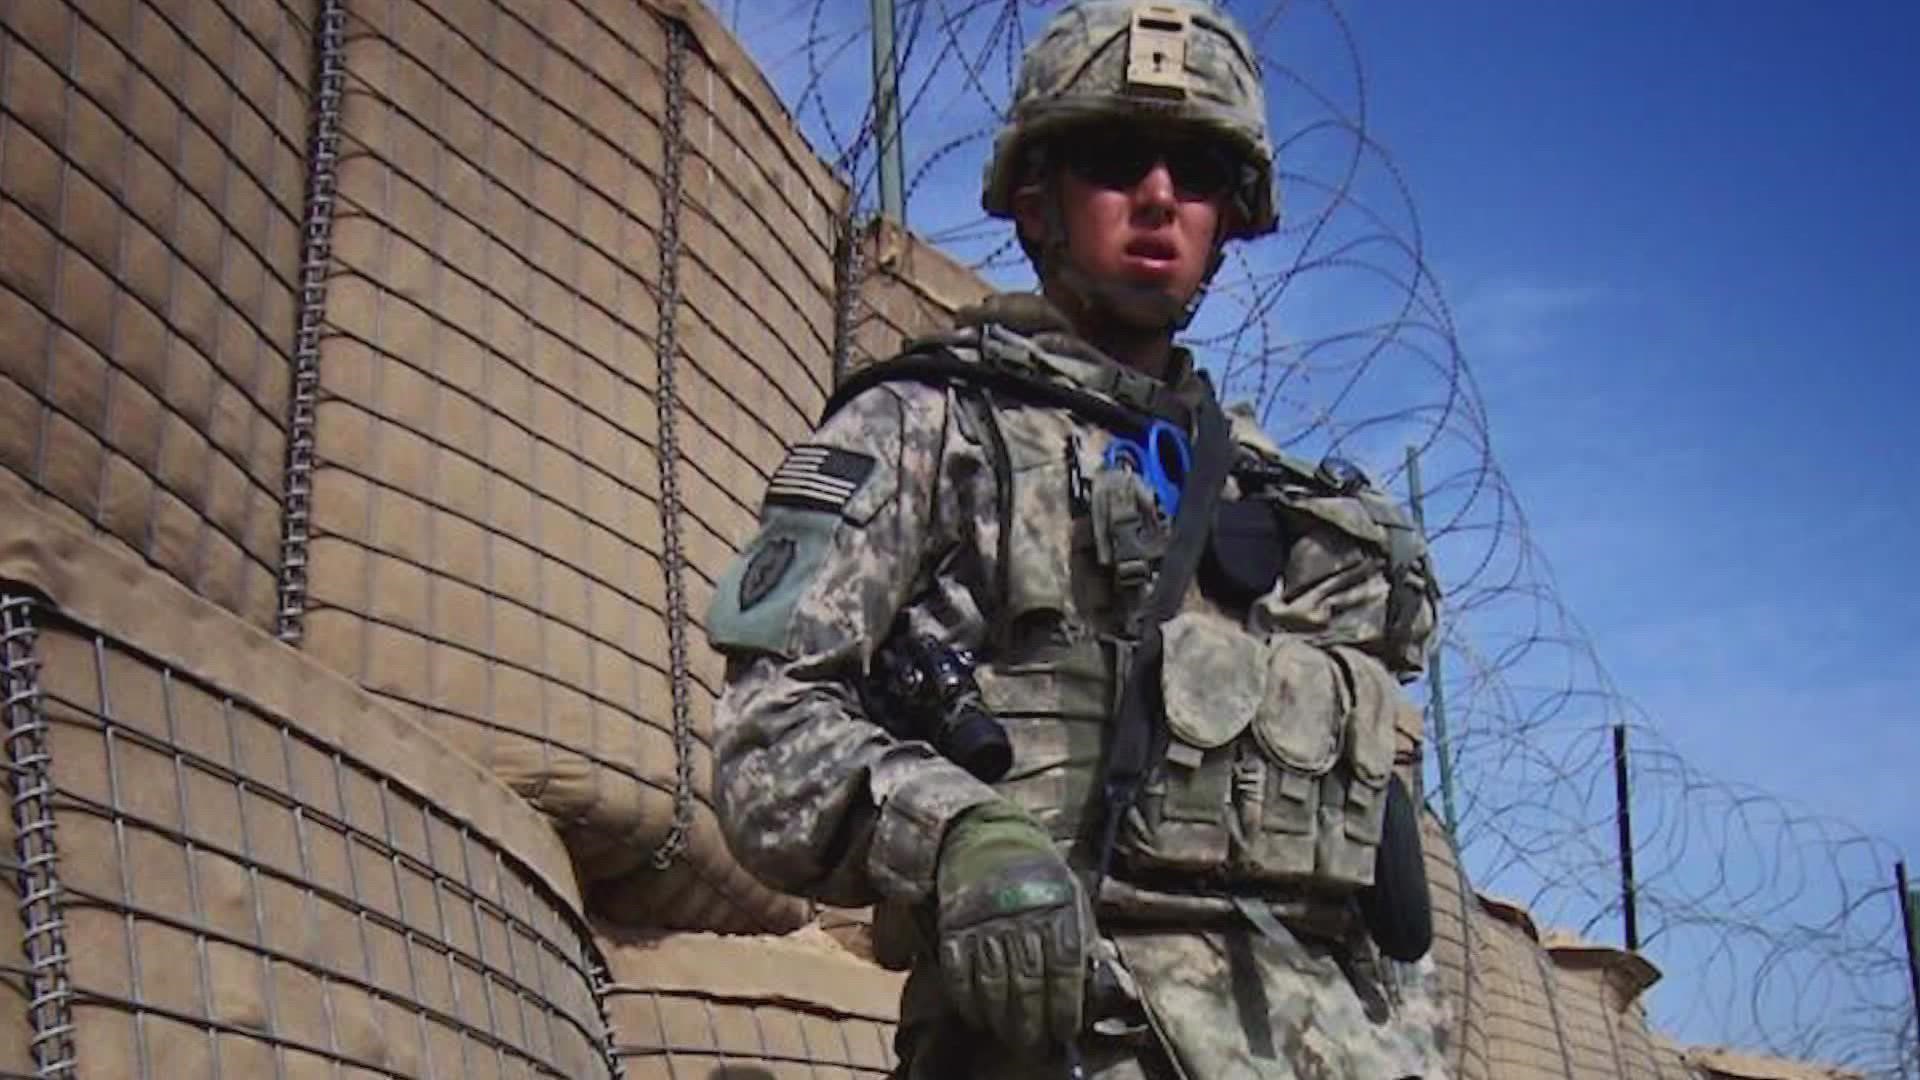 Chris Haley's story can inspire other veterans to keep going.